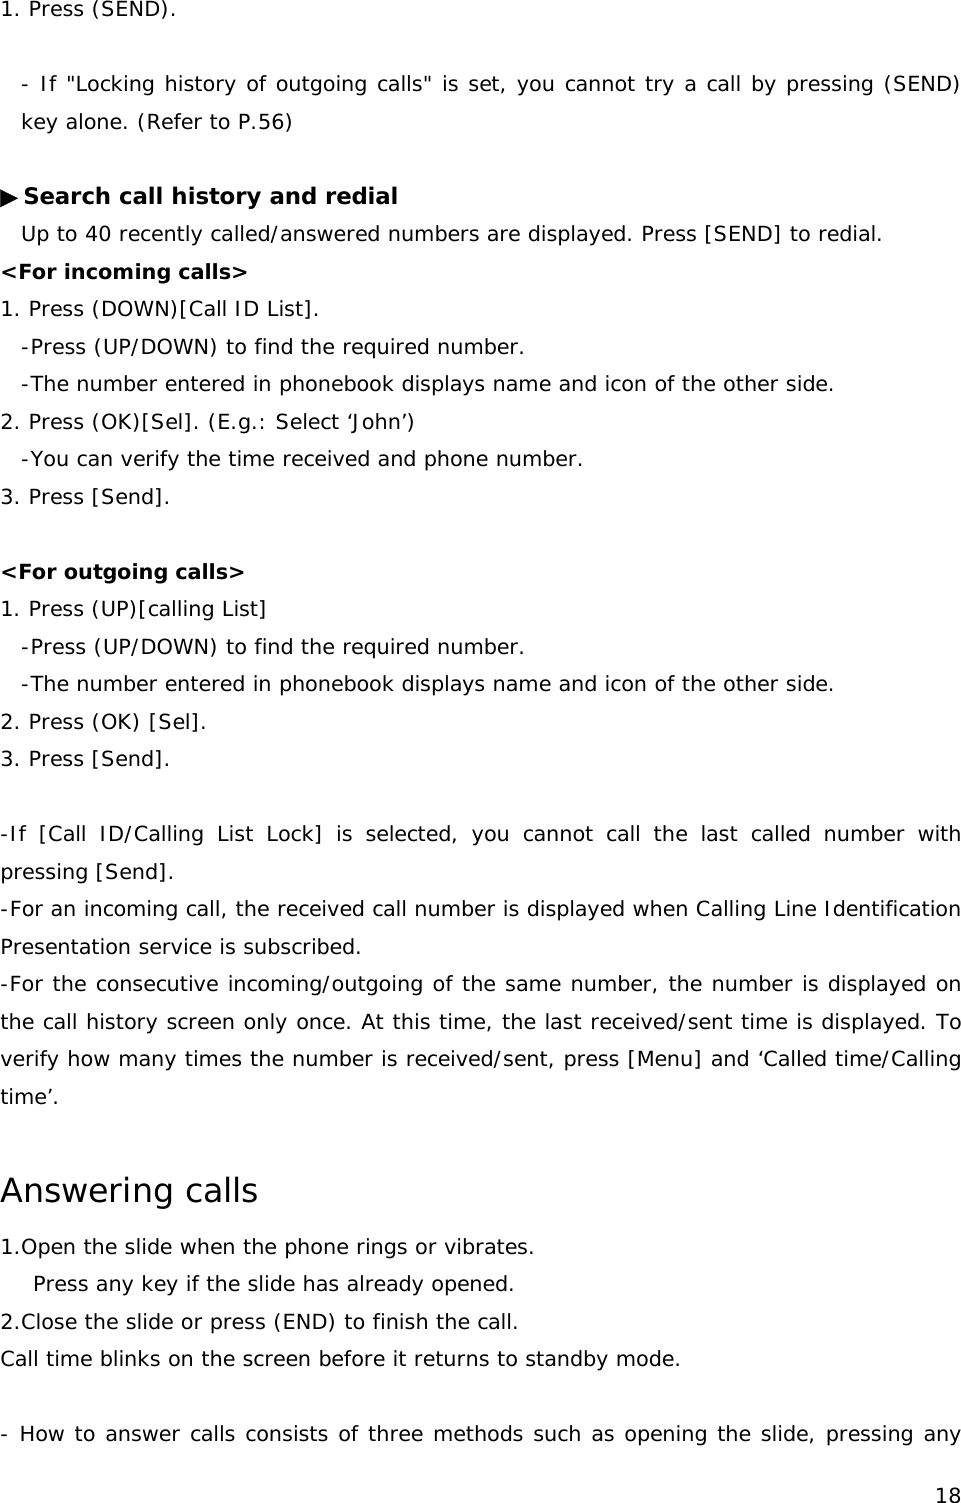 1. Press (SEND).  - If &quot;Locking history of outgoing calls&quot; is set, you cannot try a call by pressing (SEND) key alone. (Refer to P.56)  ▶Search call history and redial Up to 40 recently called/answered numbers are displayed. Press [SEND] to redial. &lt;For incoming calls&gt; 1. Press (DOWN)[Call ID List]. -Press (UP/DOWN) to find the required number. -The number entered in phonebook displays name and icon of the other side. 2. Press (OK)[Sel]. (E.g.: Select ‘John’) -You can verify the time received and phone number. 3. Press [Send].  &lt;For outgoing calls&gt; 1. Press (UP)[calling List] -Press (UP/DOWN) to find the required number. -The number entered in phonebook displays name and icon of the other side. 2. Press (OK) [Sel].  3. Press [Send].  -If [Call ID/Calling List Lock] is selected, you cannot call the last called number with pressing [Send].  -For an incoming call, the received call number is displayed when Calling Line Identification Presentation service is subscribed.  -For the consecutive incoming/outgoing of the same number, the number is displayed on the call history screen only once. At this time, the last received/sent time is displayed. To verify how many times the number is received/sent, press [Menu] and ‘Called time/Calling time’.  Answering calls 1.Open the slide when the phone rings or vibrates. ress any key if the slide has already opened. P2.Close the slide or press (END) to finish the call. Call time blinks on the screen before it returns to standby mode.  - How to answer calls consists of three methods such as opening the slide, pressing any  18